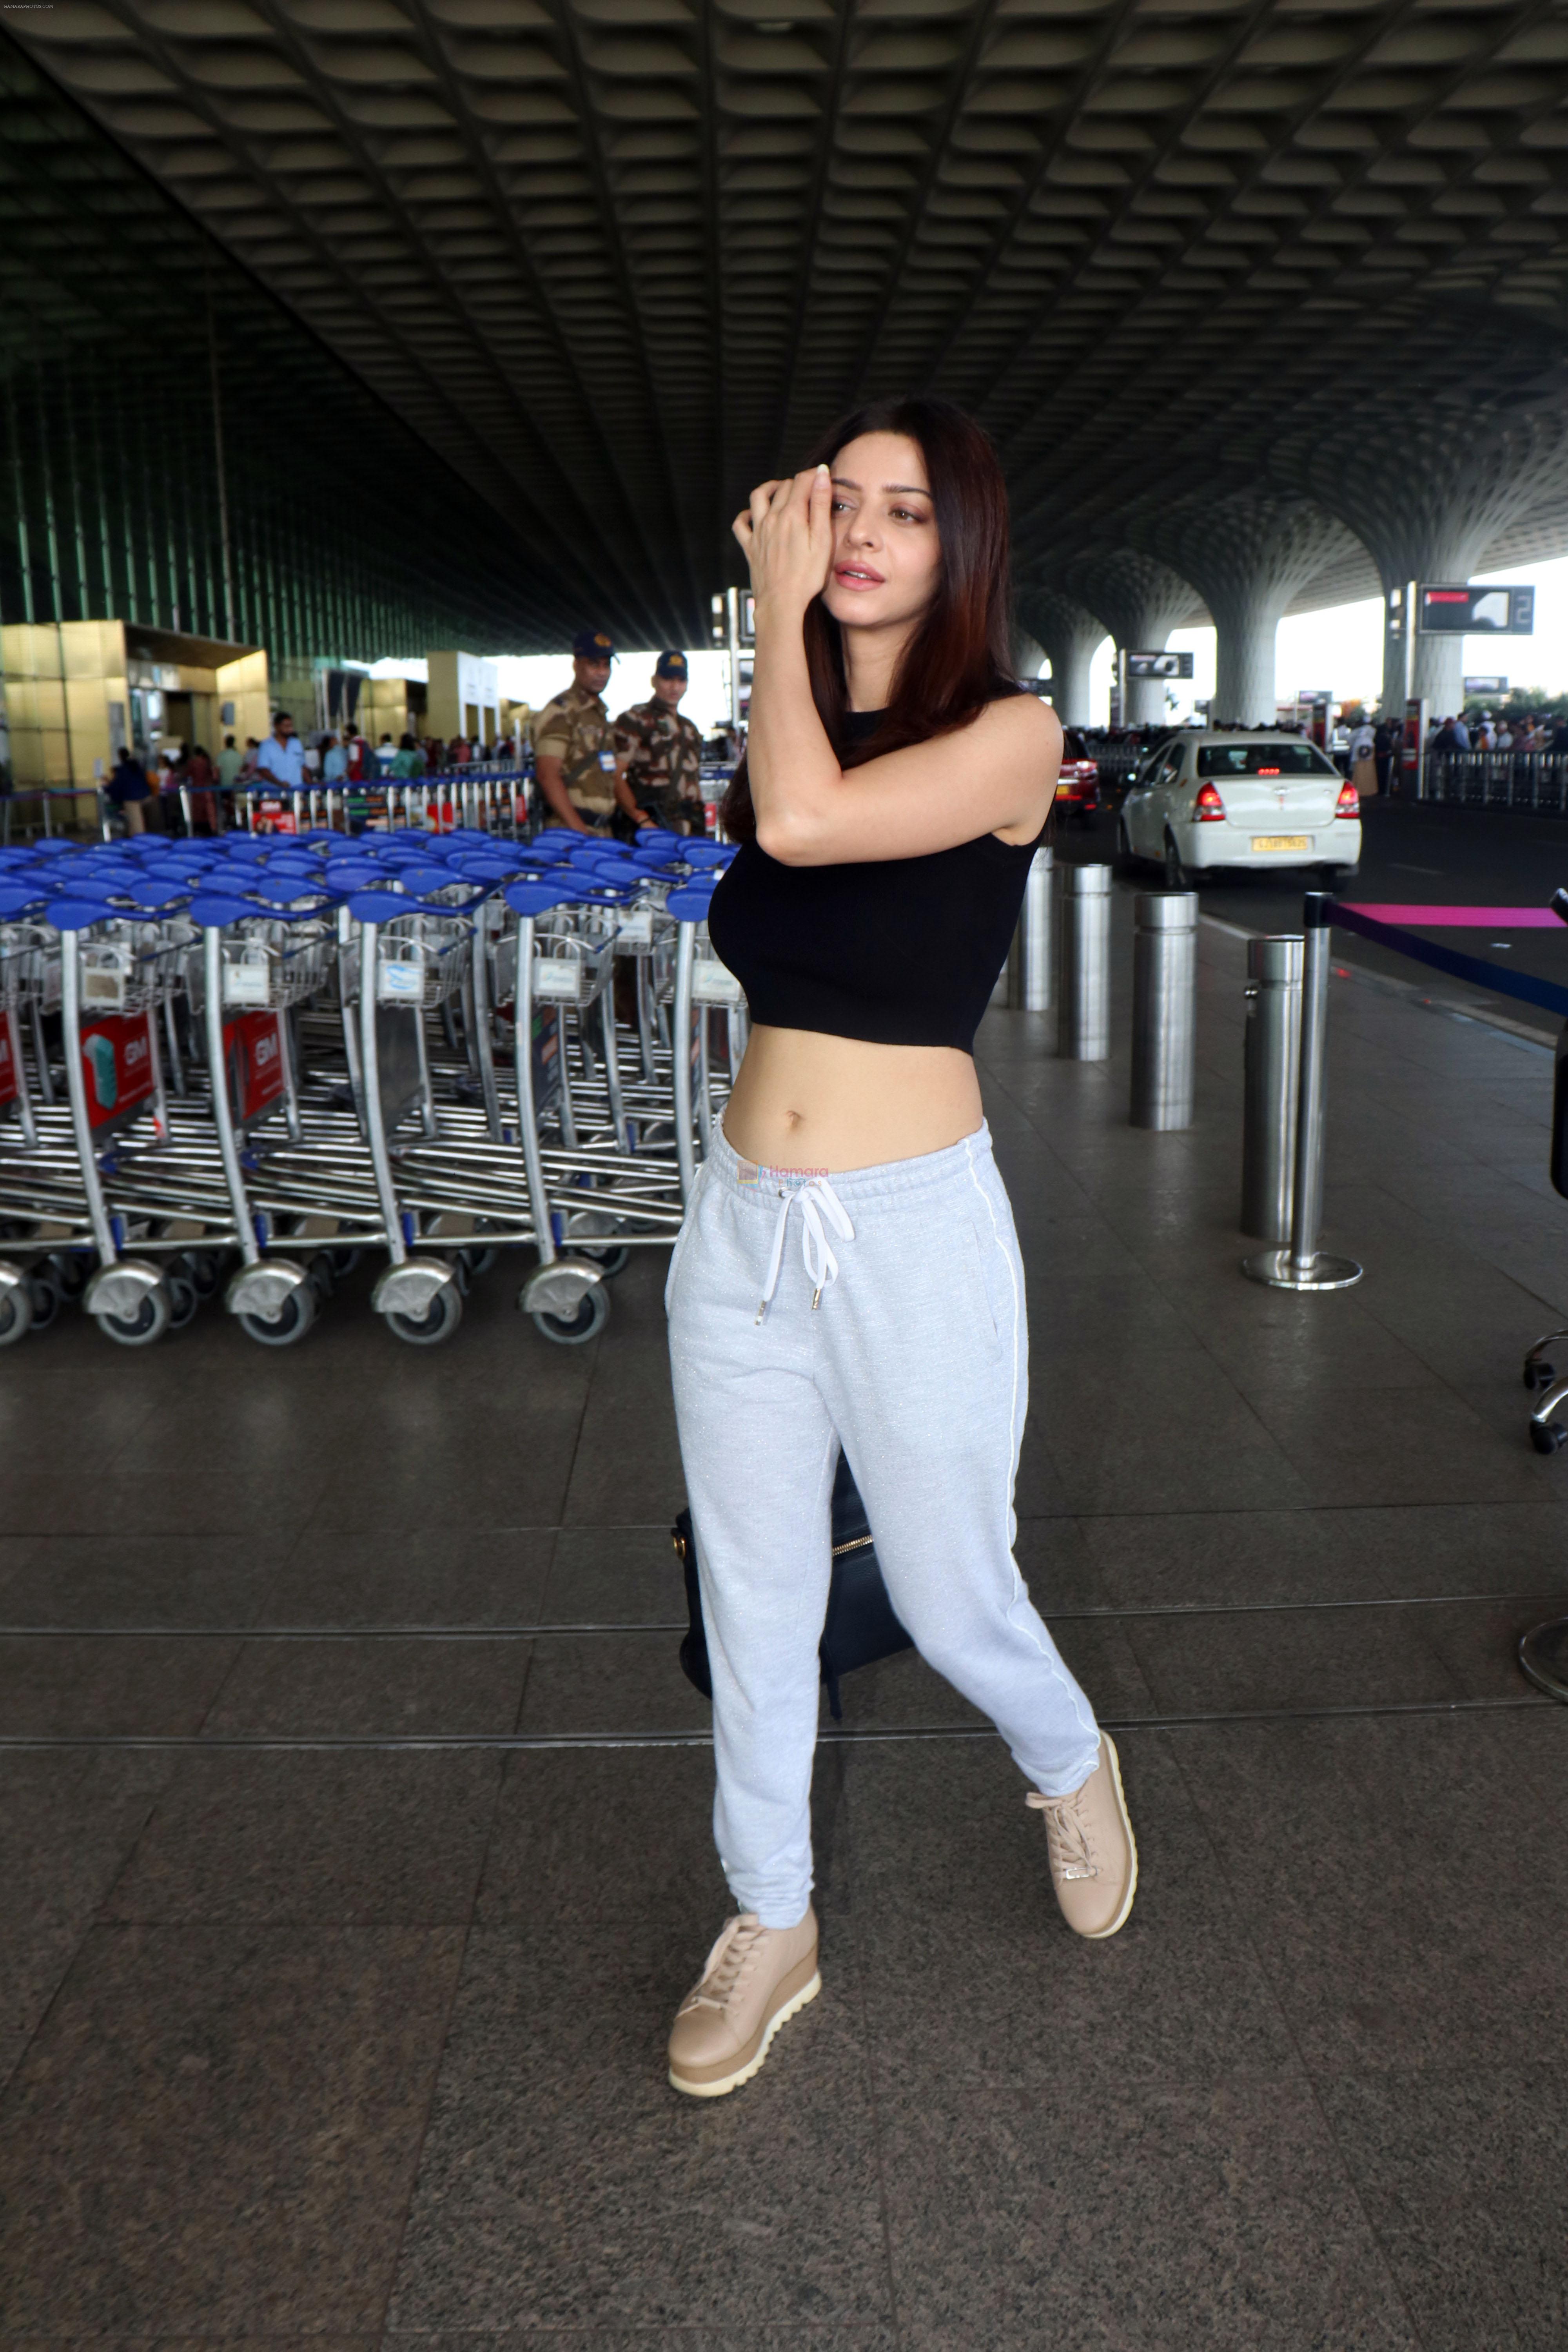 Vedhika Kumar travelling wearing Black sleeveless top and sweat pant carrying a leather handbag